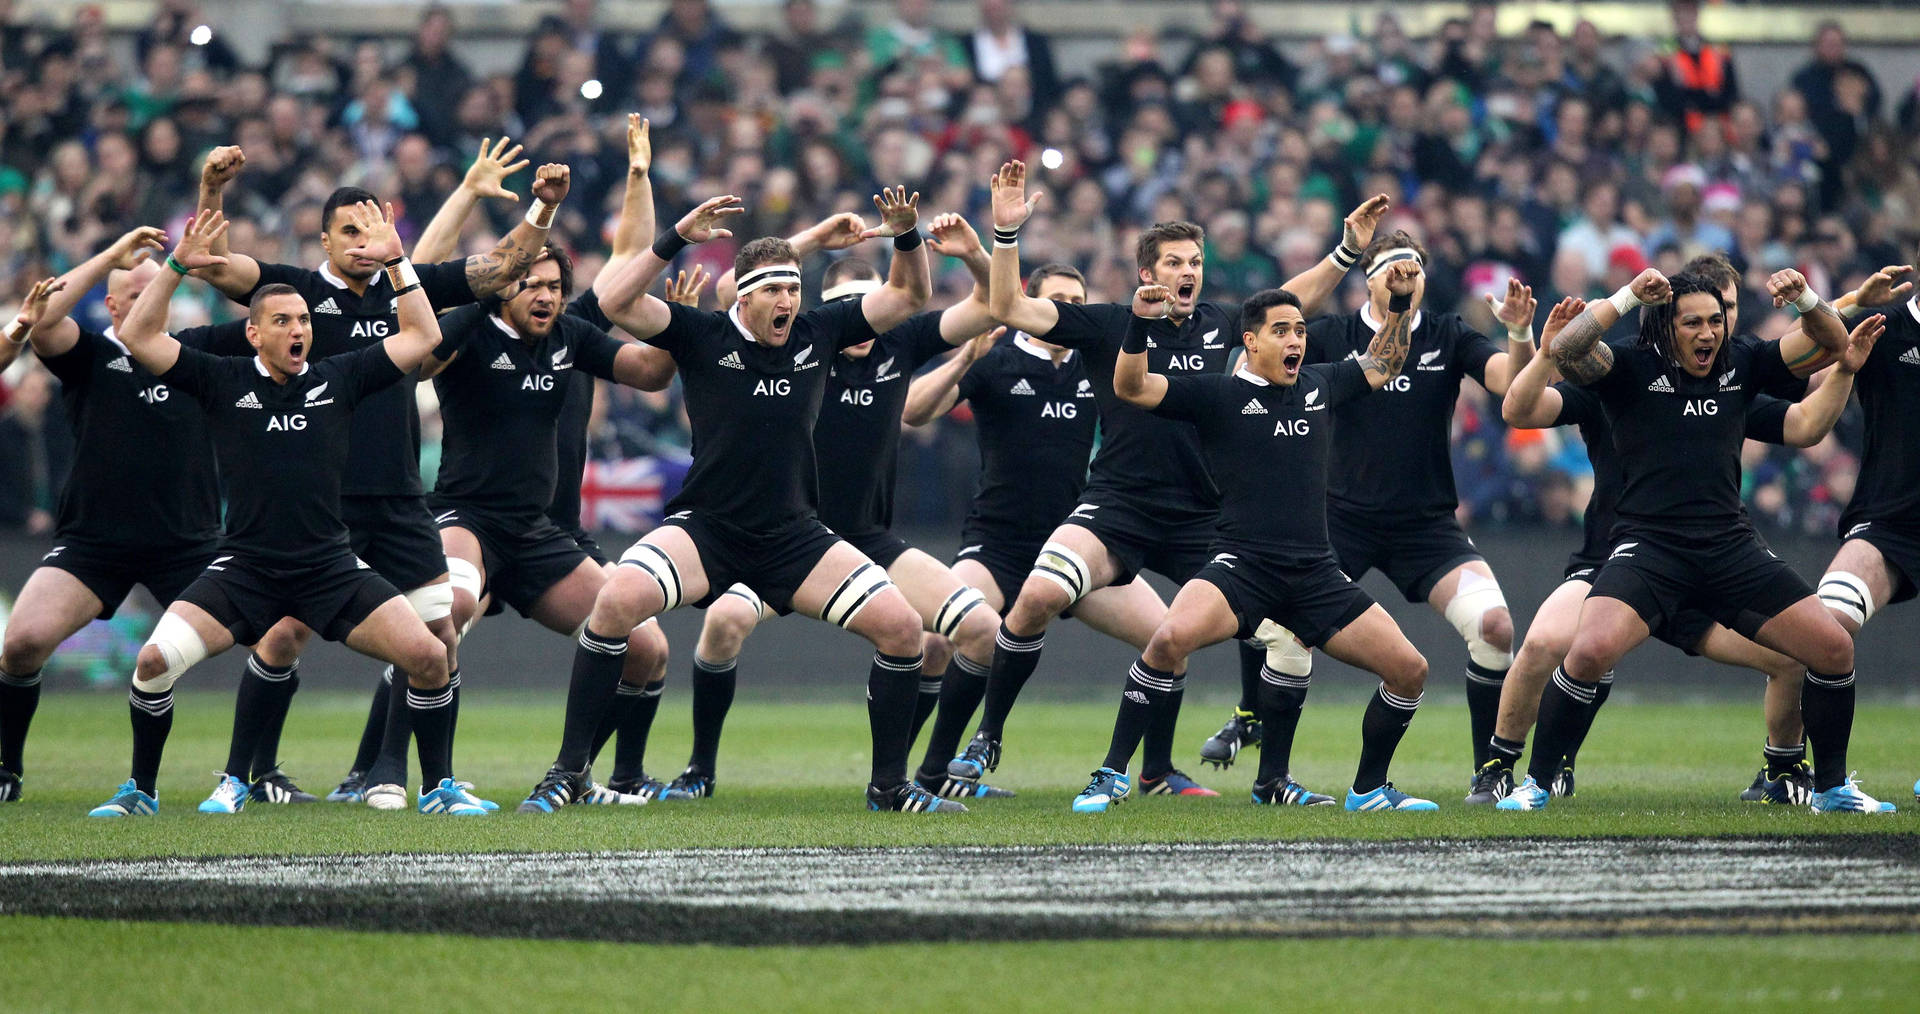 Caption: The All Blacks Rugby Team Performing The Haka Ritual Background